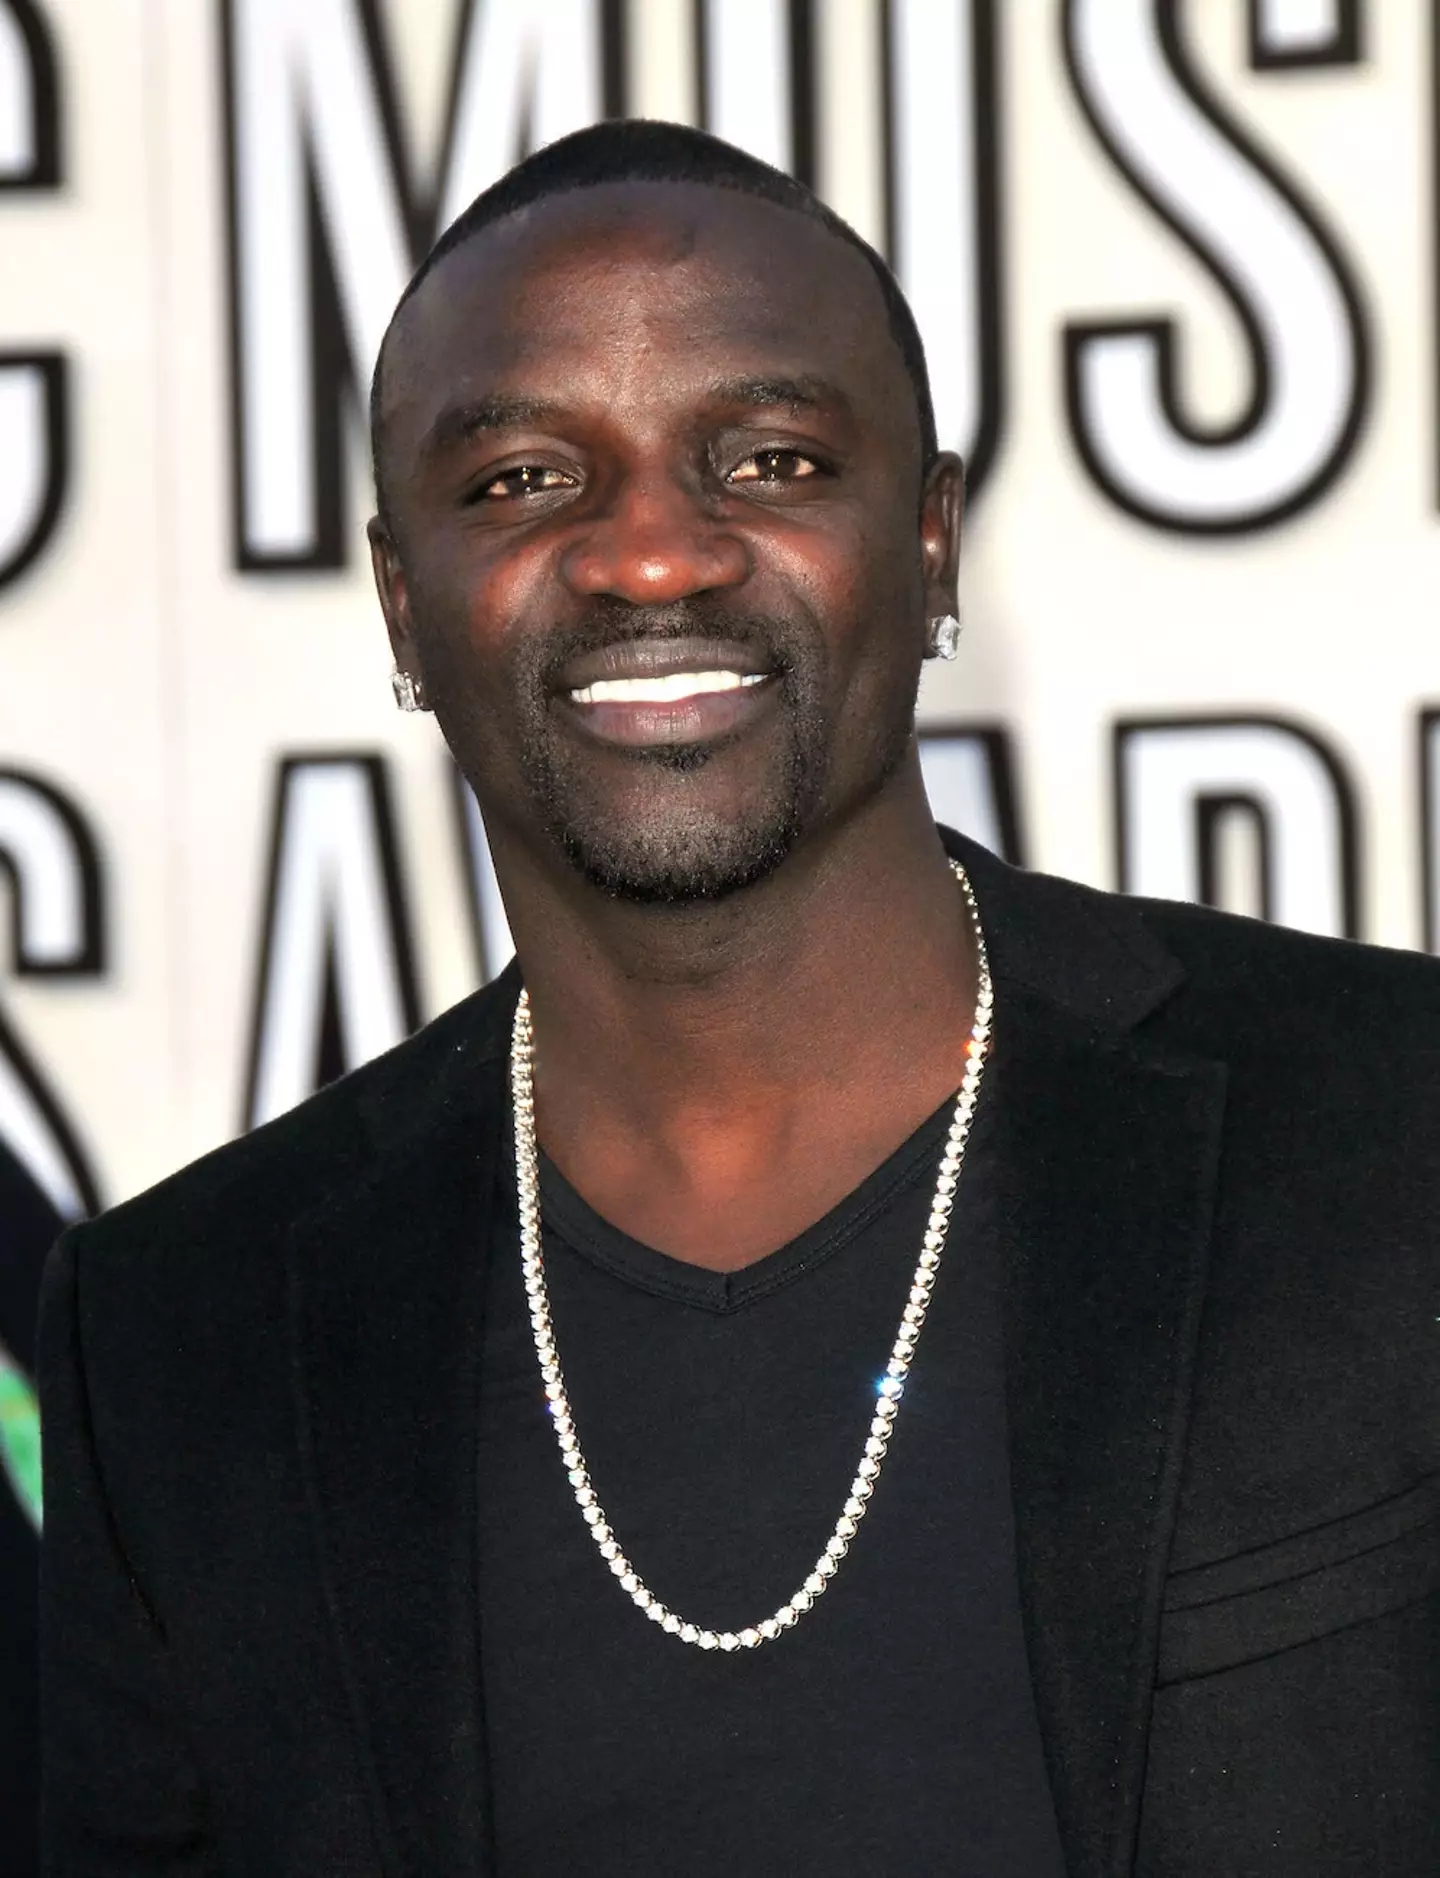 Akon pictured at the 2010 MTV Video Music Awards.